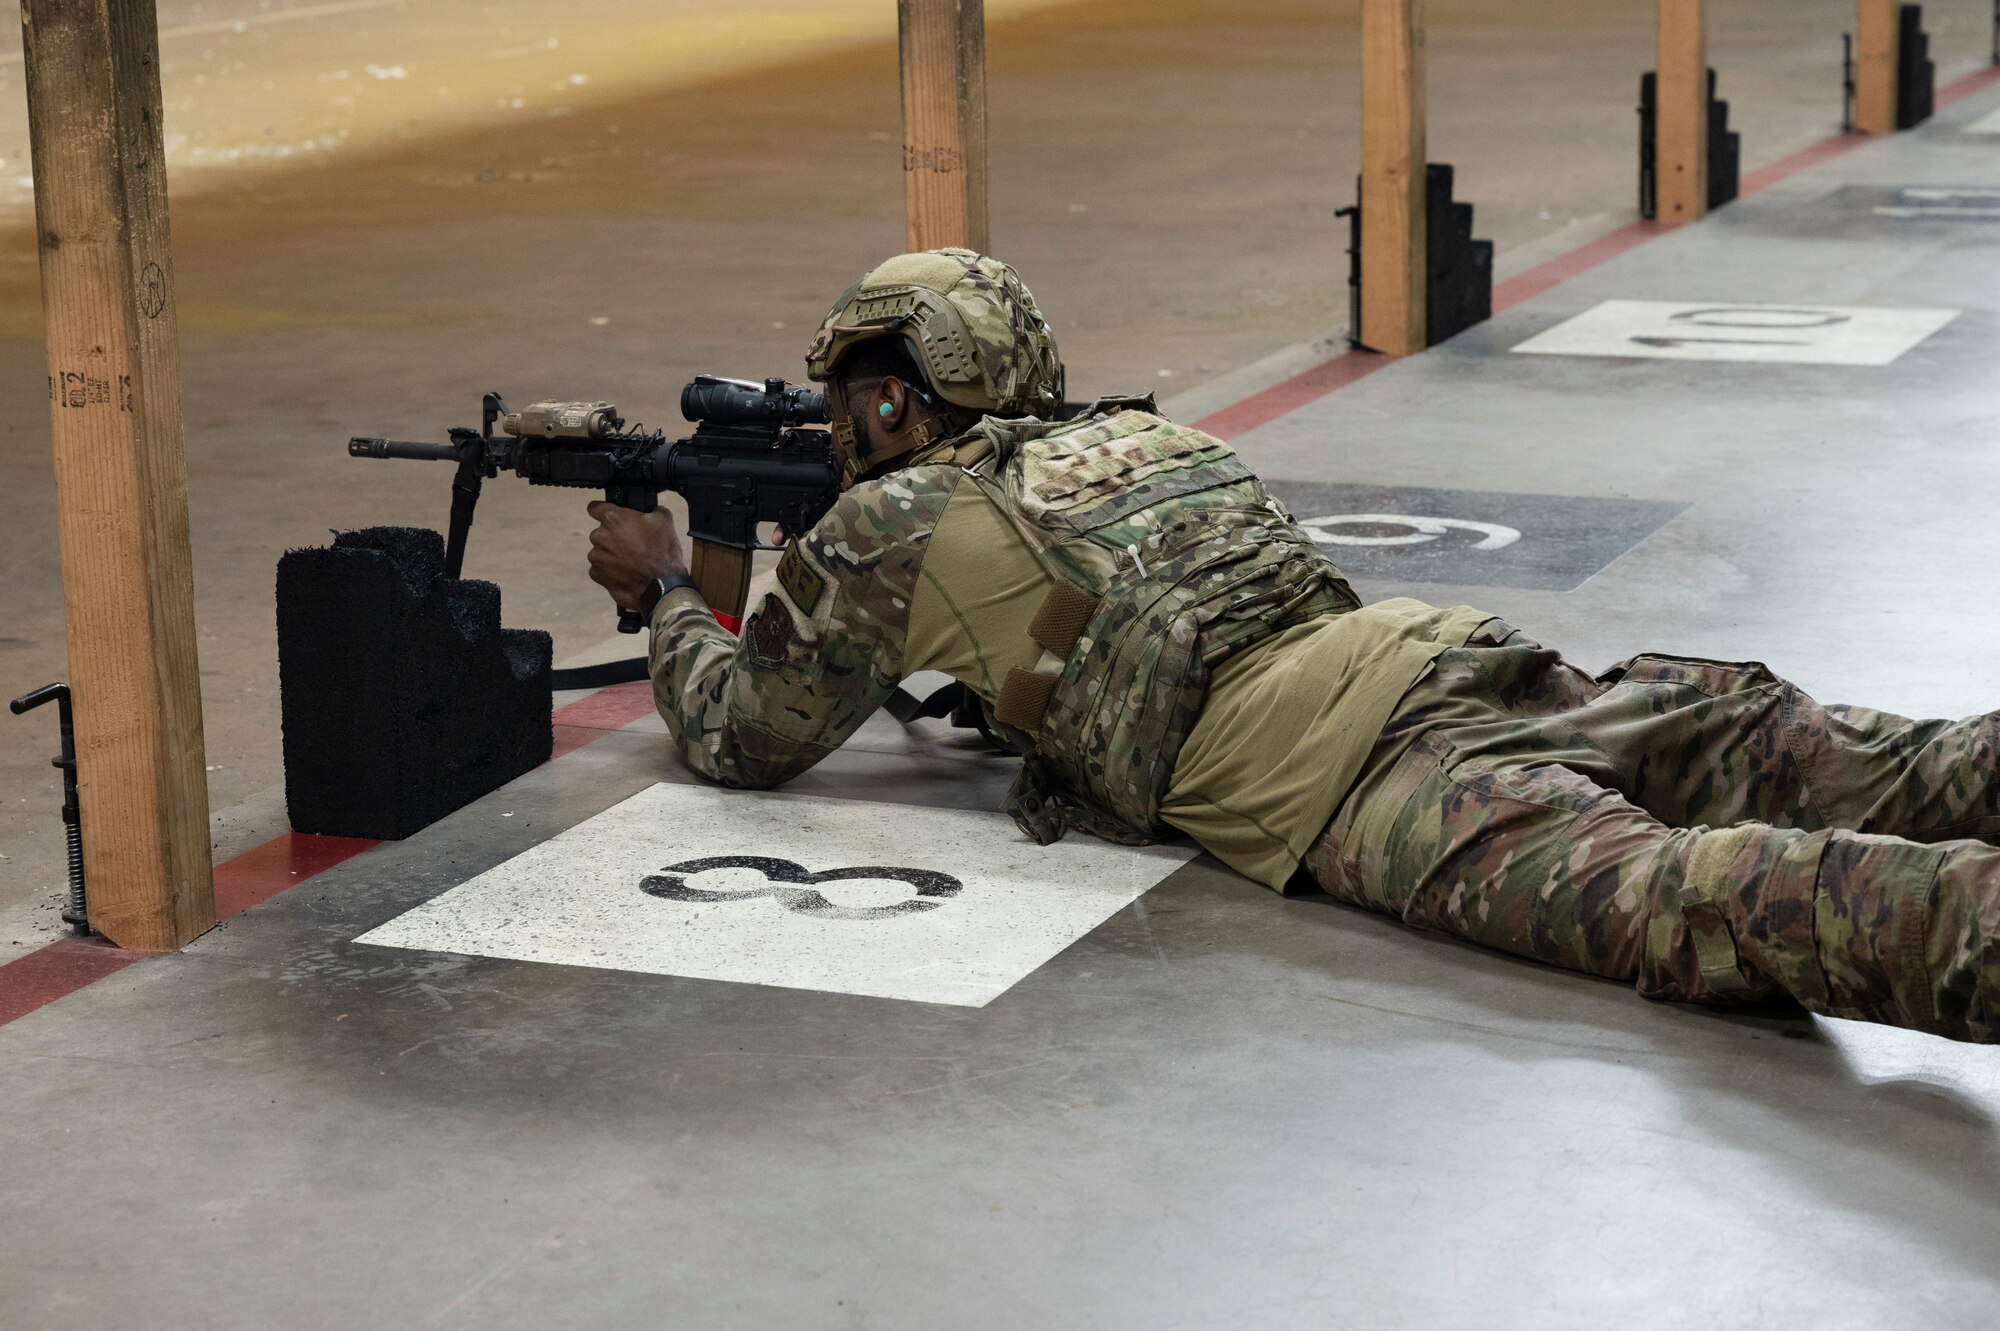 U.S. Air Force Airman 1st Class, Elijah Pogue, 7th Security Forces Squadron defender, fires an M-4 rifle during the combat arms portion of the Expert Defender competition at Dyess Air Force Base, Texas, Oct. 25, 2023. The various portions of the competition pushed Airmen to improve their weapon handling, physical fitness and map reading skills. (U.S. Air Force photo by Airman 1st Class Alondra Cristobal Hernandez)